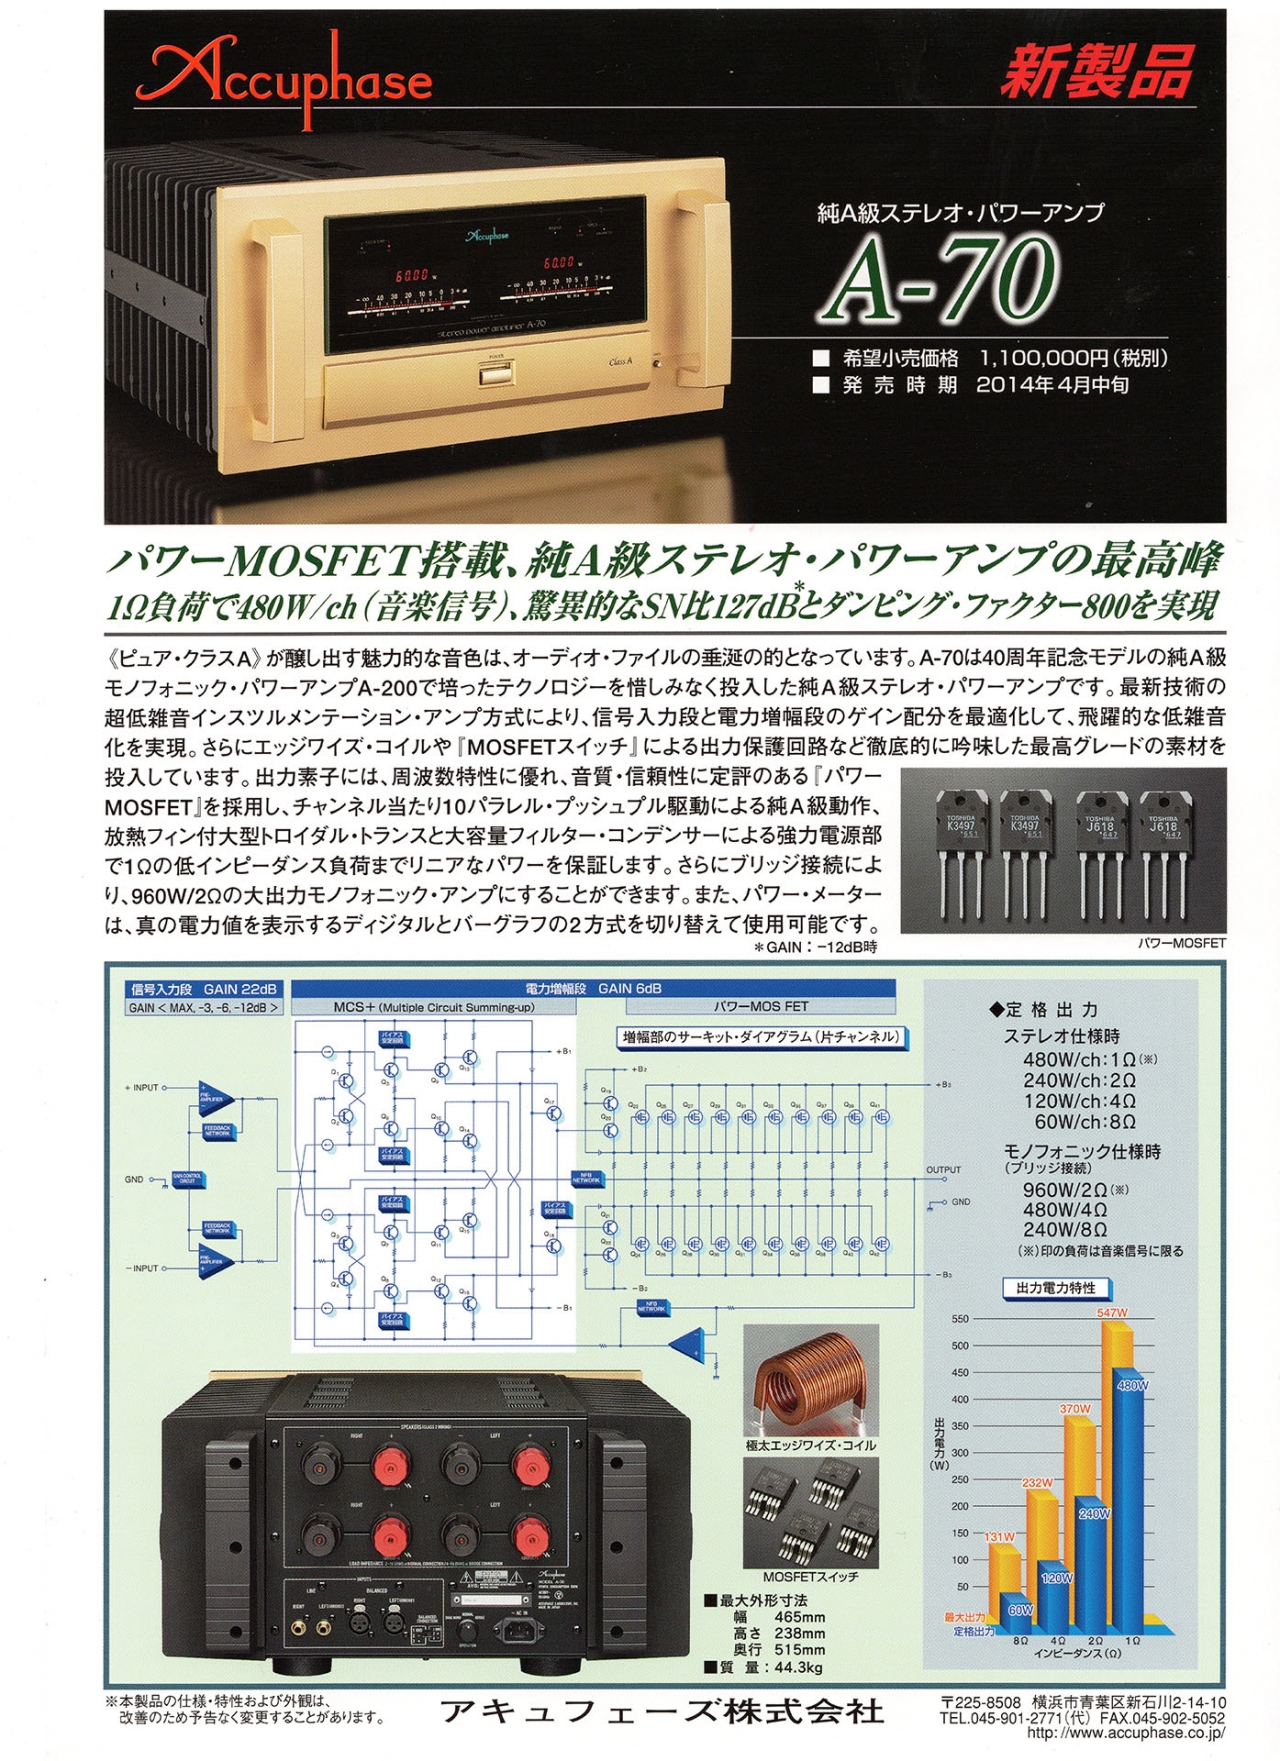 ACCUPHASE のA-70を聴く！の巻 - サウンドテック